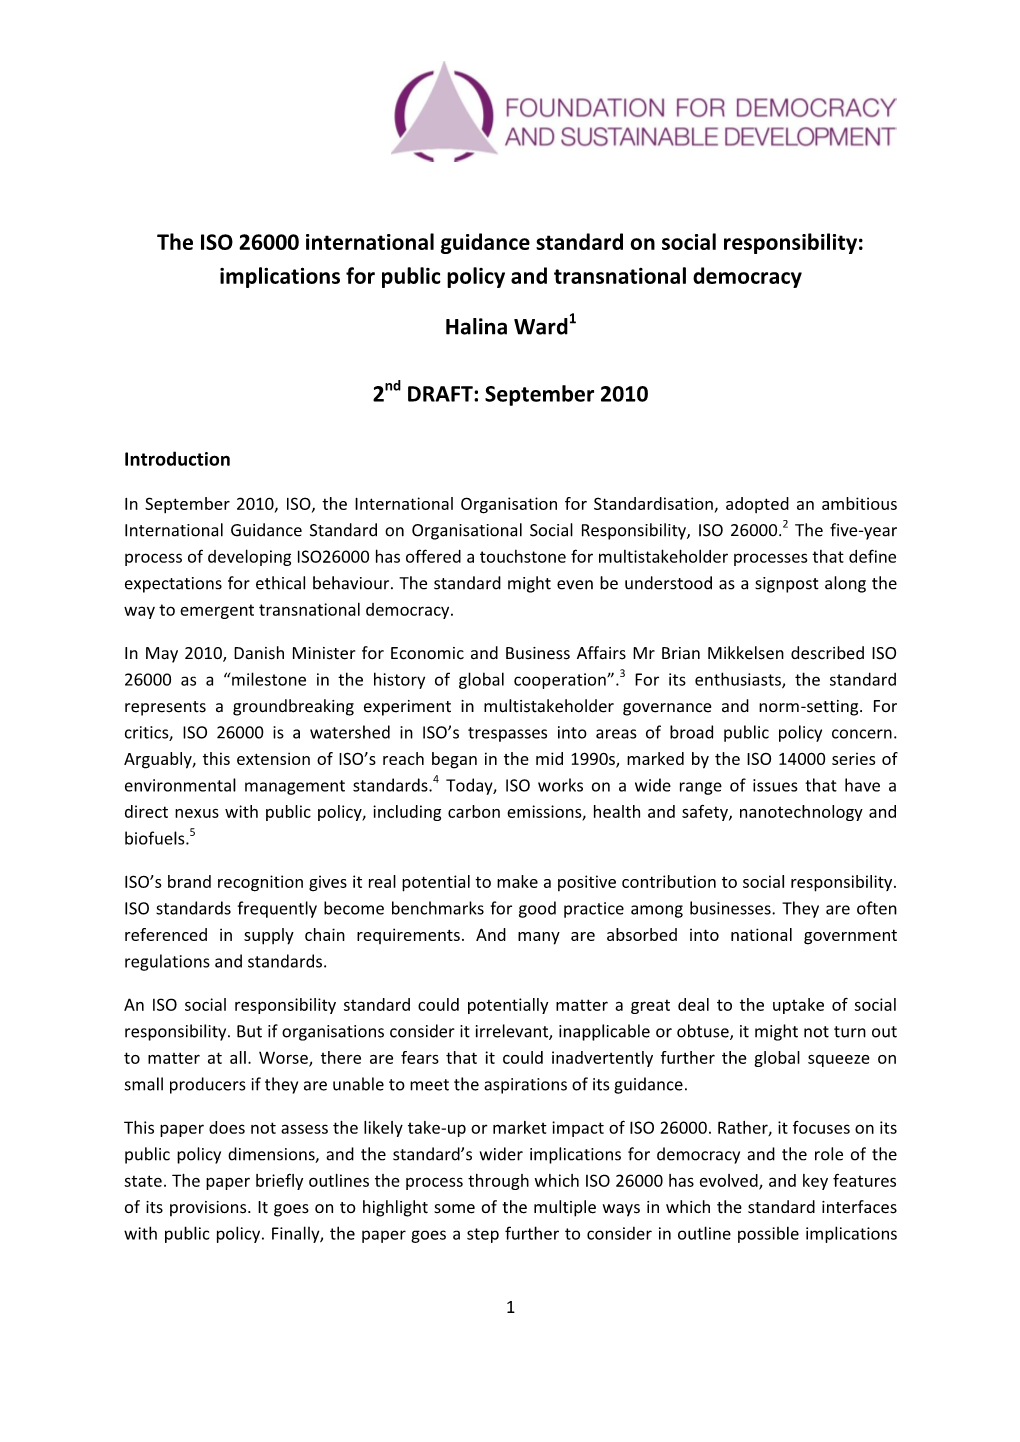 The ISO 26000 International Guidance Standard on Social Responsibility: Implications for Public Policy and Transnational Democracy